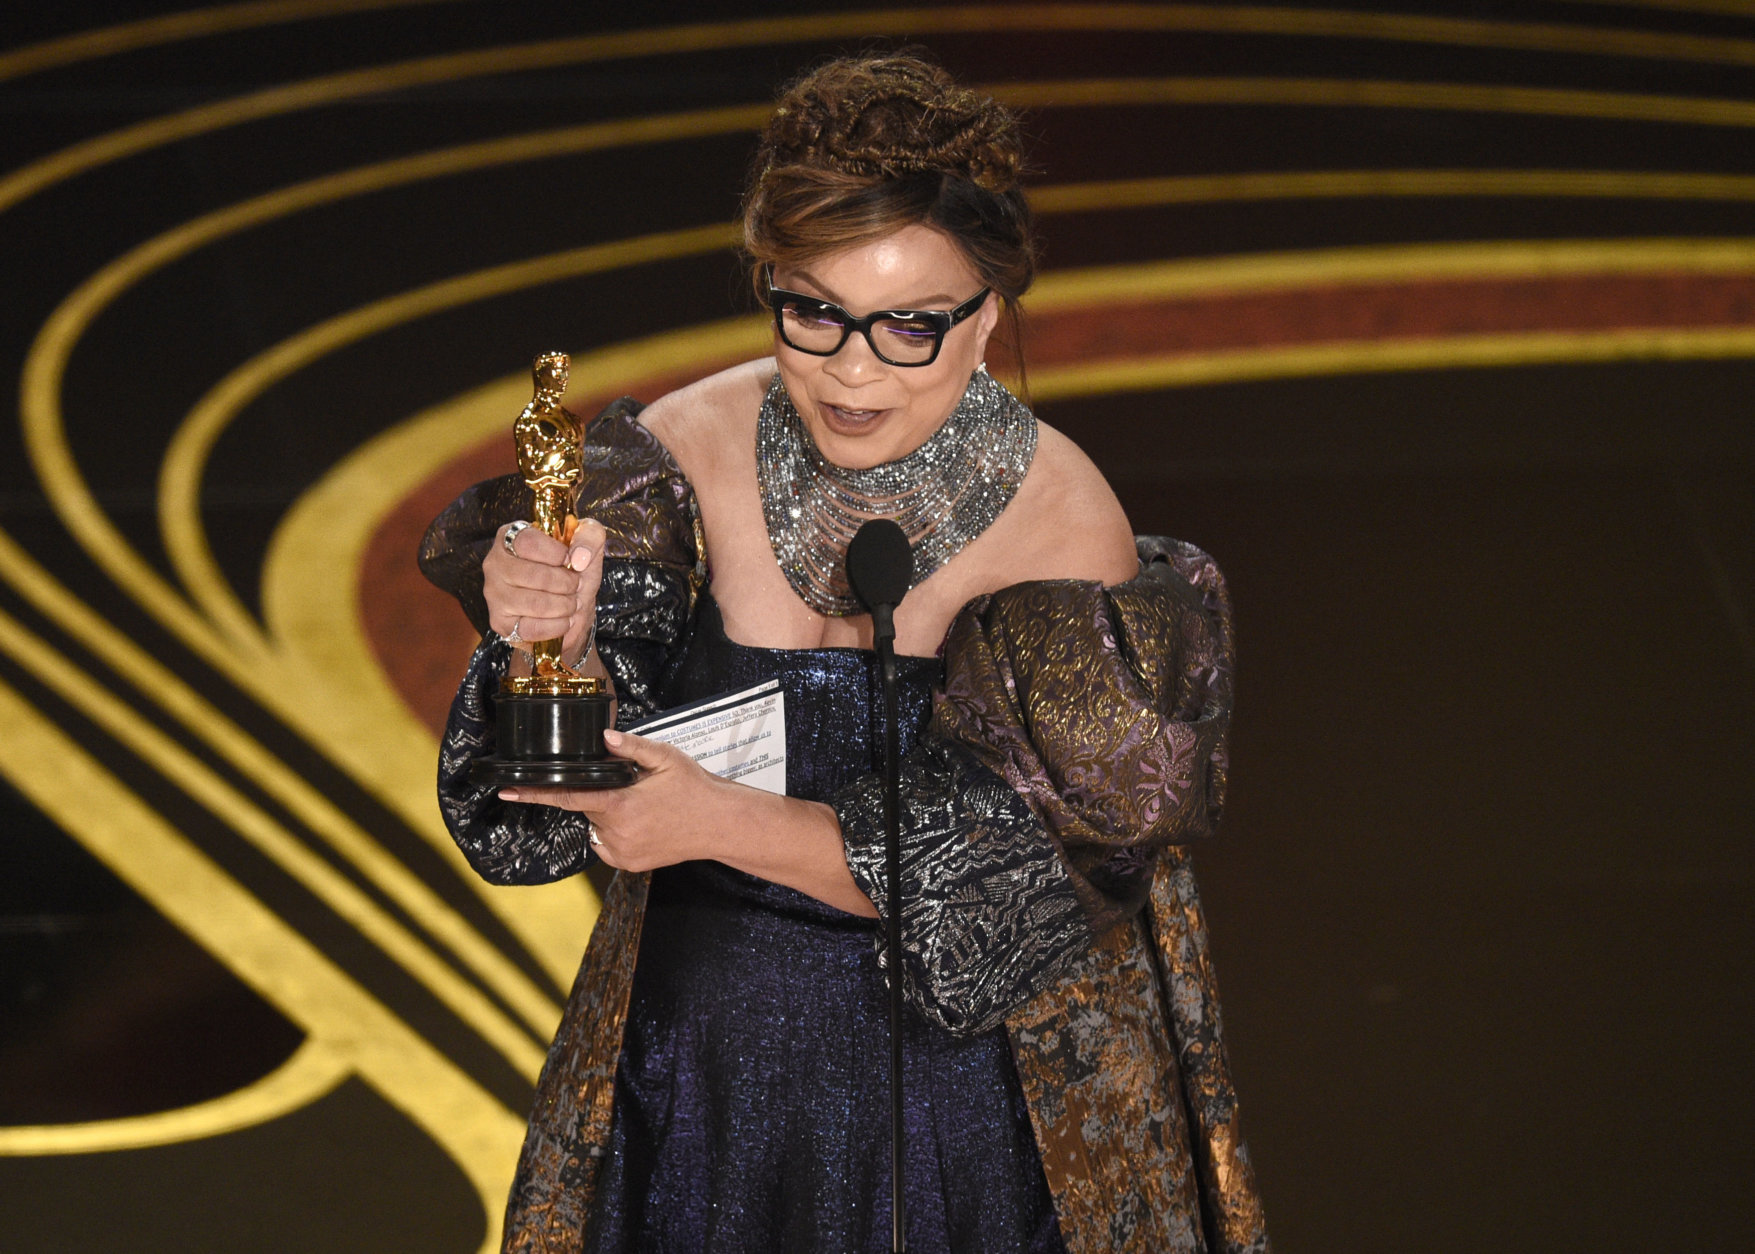 Ruth E. Carter accepts the award for best costume design for "Black Panther" at the Oscars on Sunday, Feb. 24, 2019, at the Dolby Theatre in Los Angeles. (Photo by Chris Pizzello/Invision/AP)